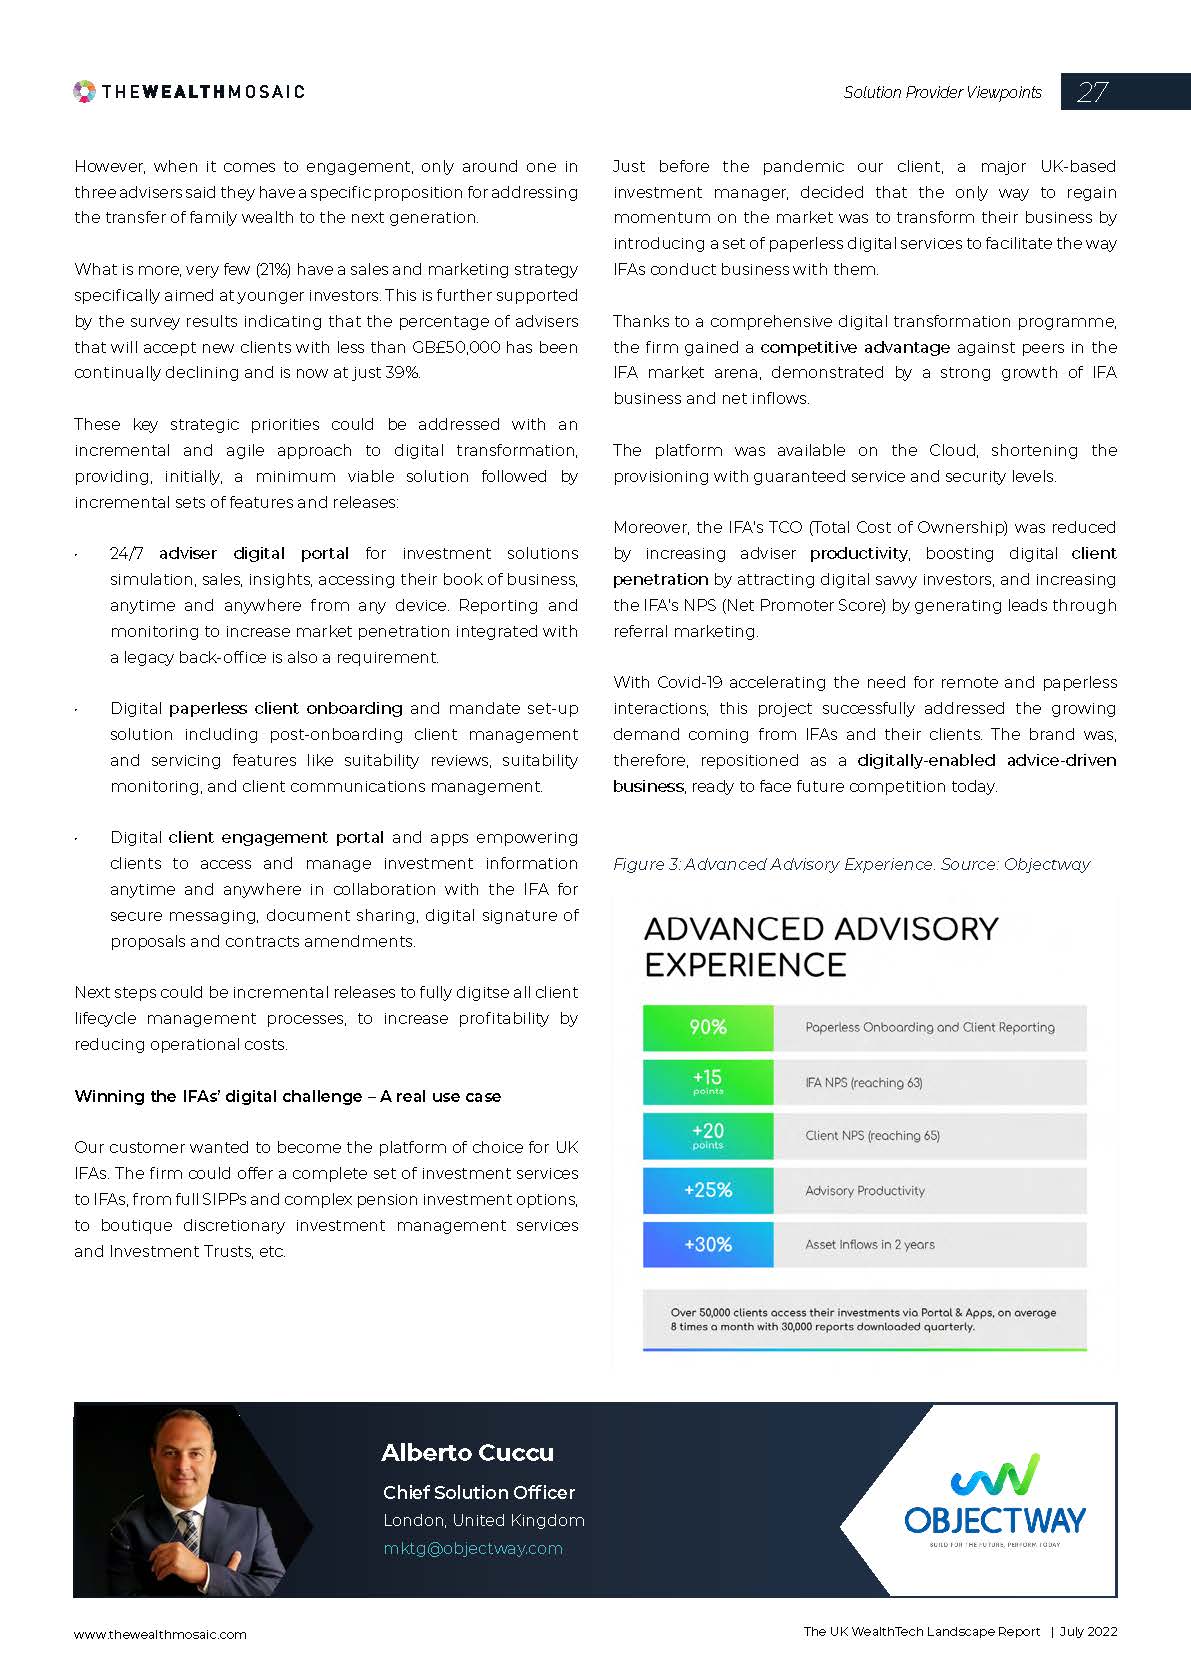 Objectway and The Wealth Mosaic Front Page describing how providing digital-first approach and ease of use is and will be more and more a key factor of choice